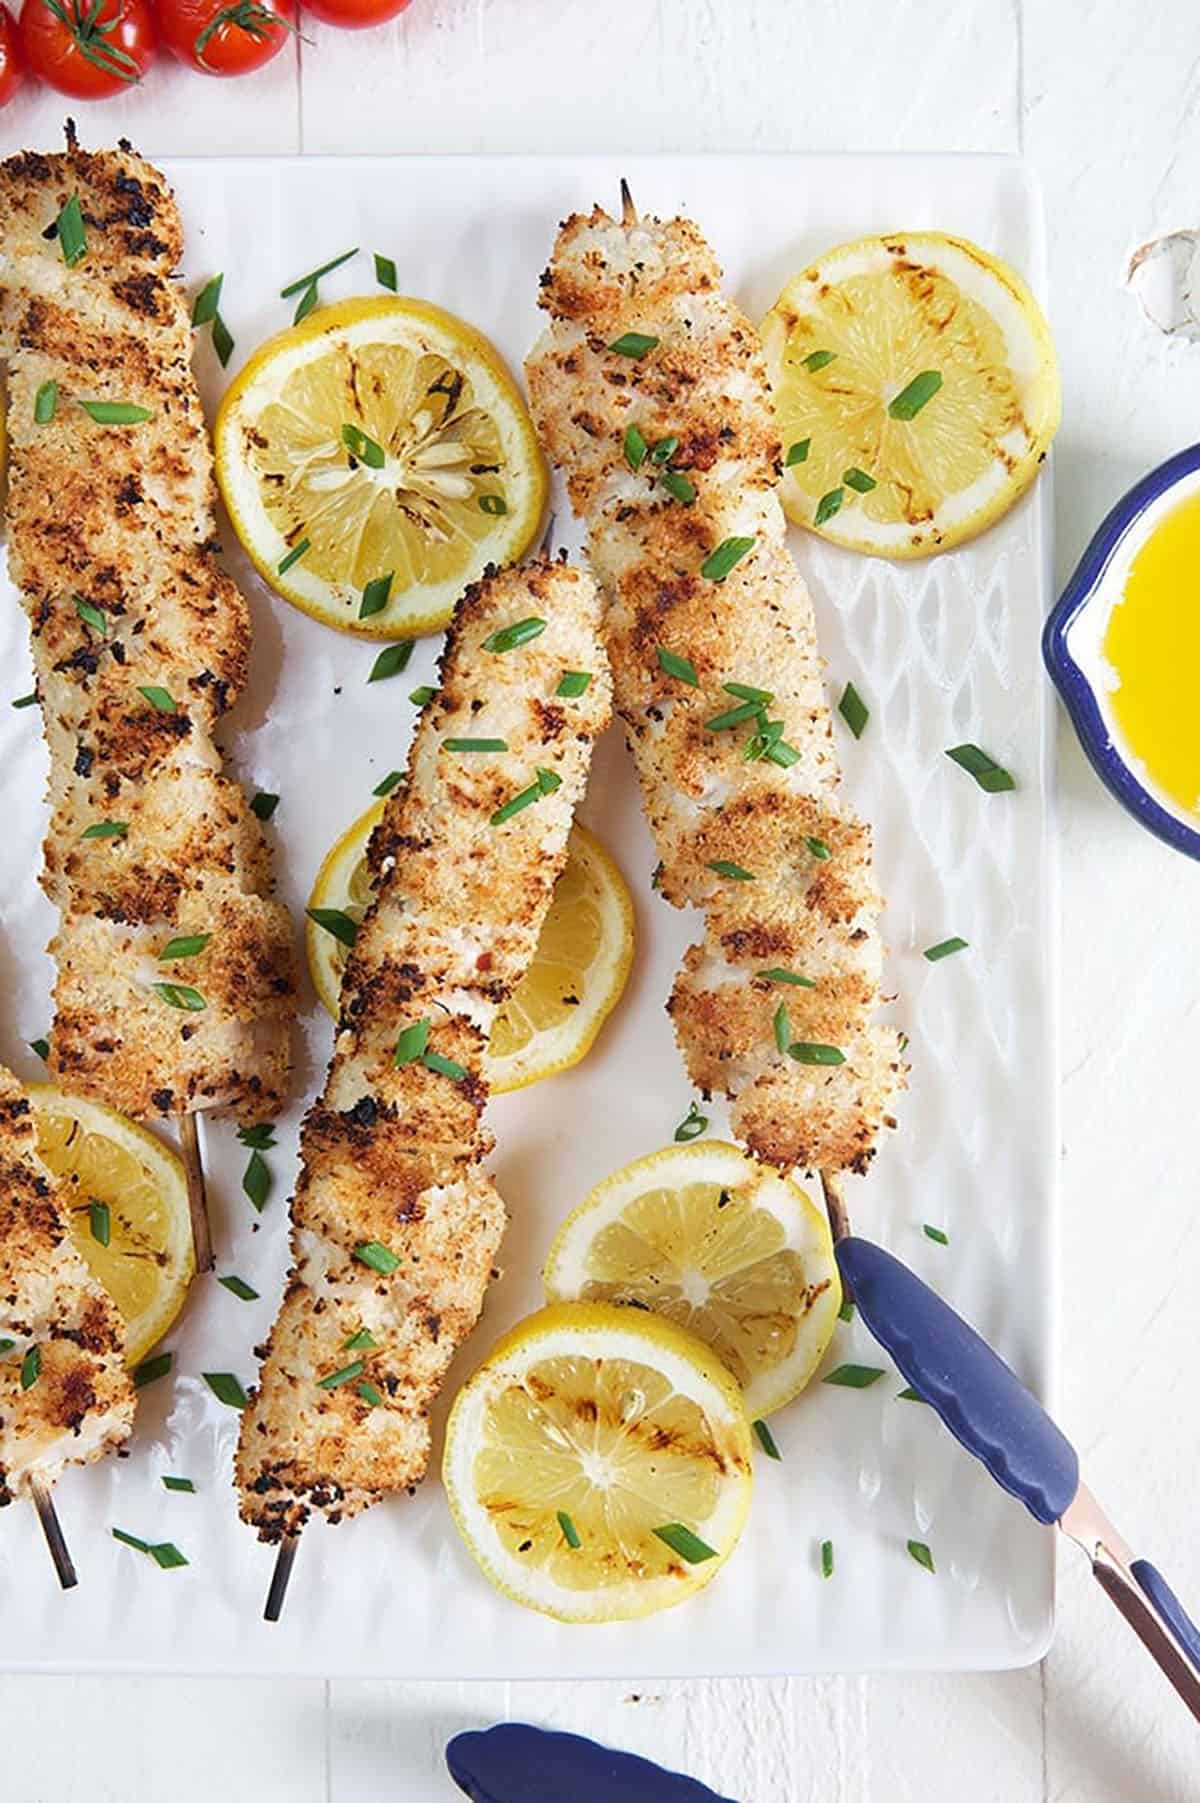 Grilled Chicken Spiedini skewers on a white plate with lemons and blue tongs